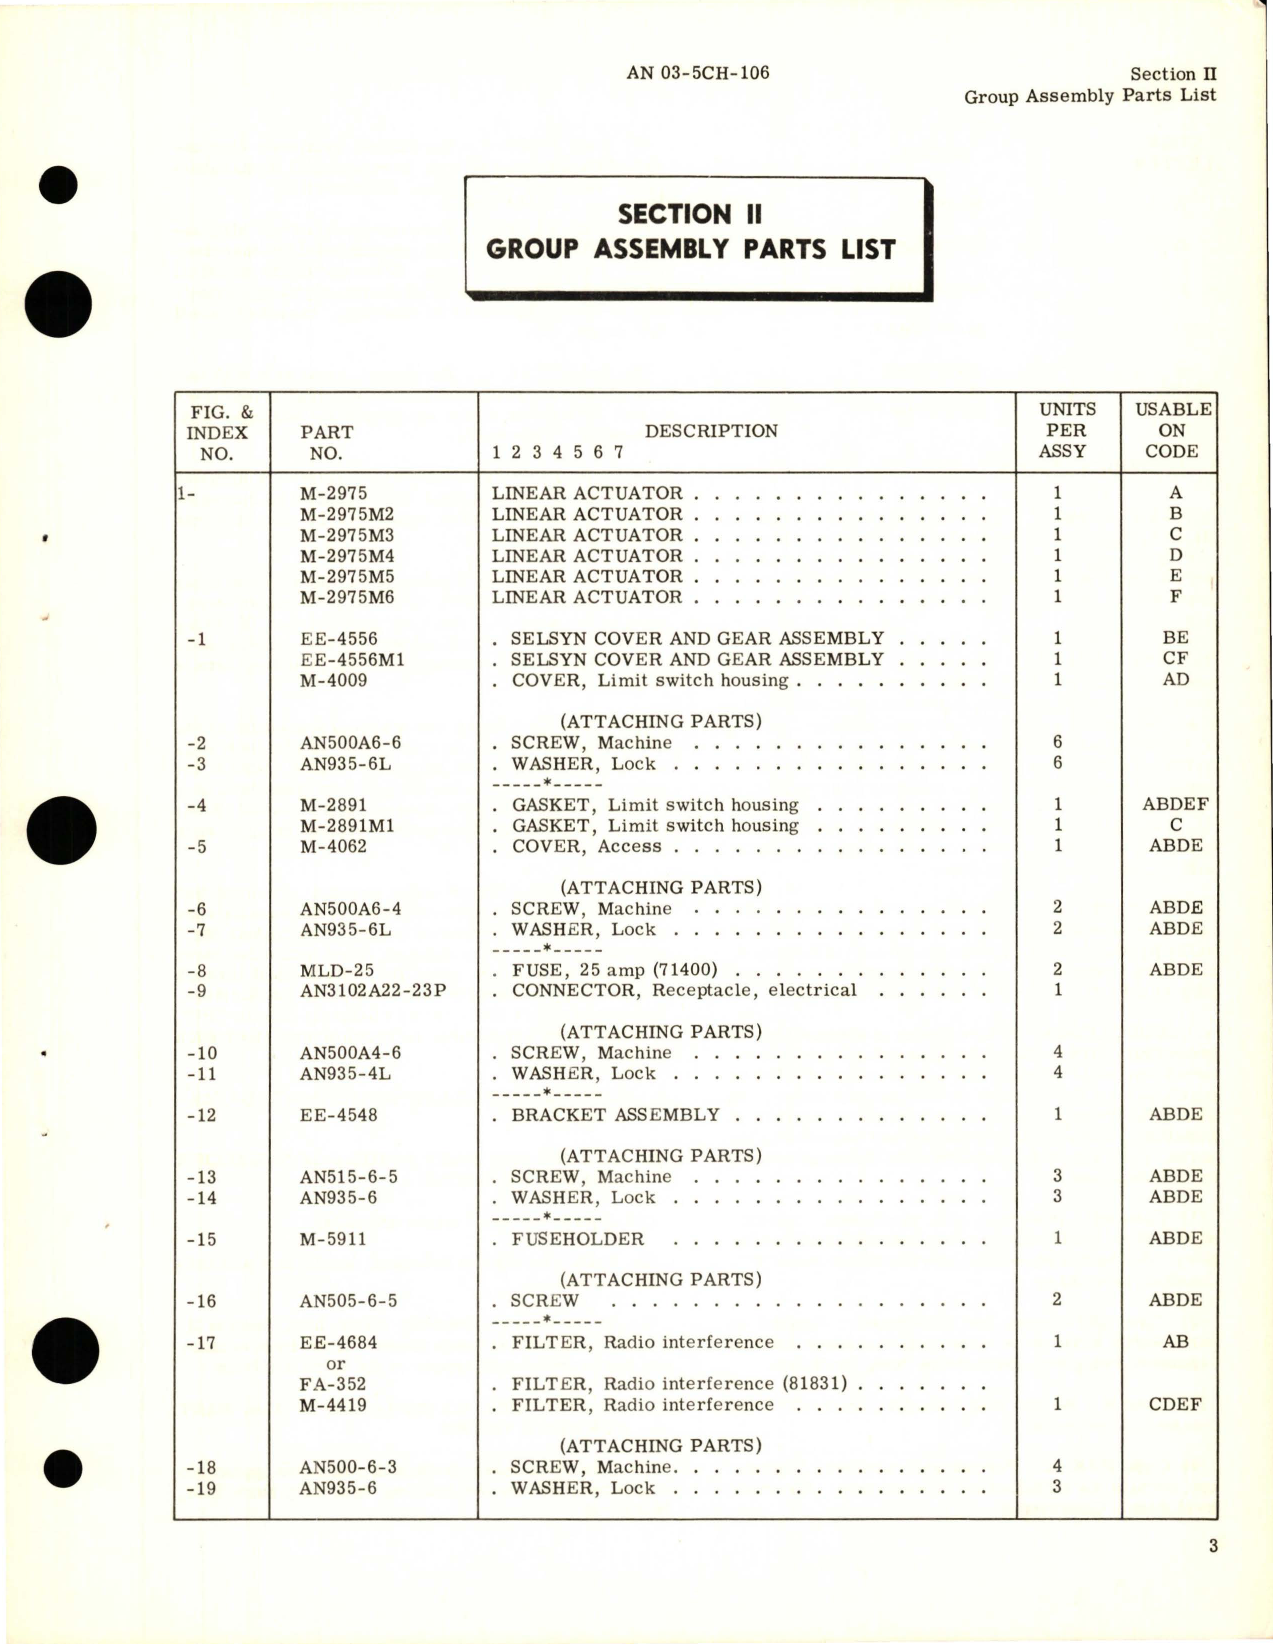 Sample page 7 from AirCorps Library document: Illustrated Parts Breakdown for Linear Actuator - Models M-2975, M-2975M2, M-2975M3, M-2975M4, M-2975M5, and M-2975M6